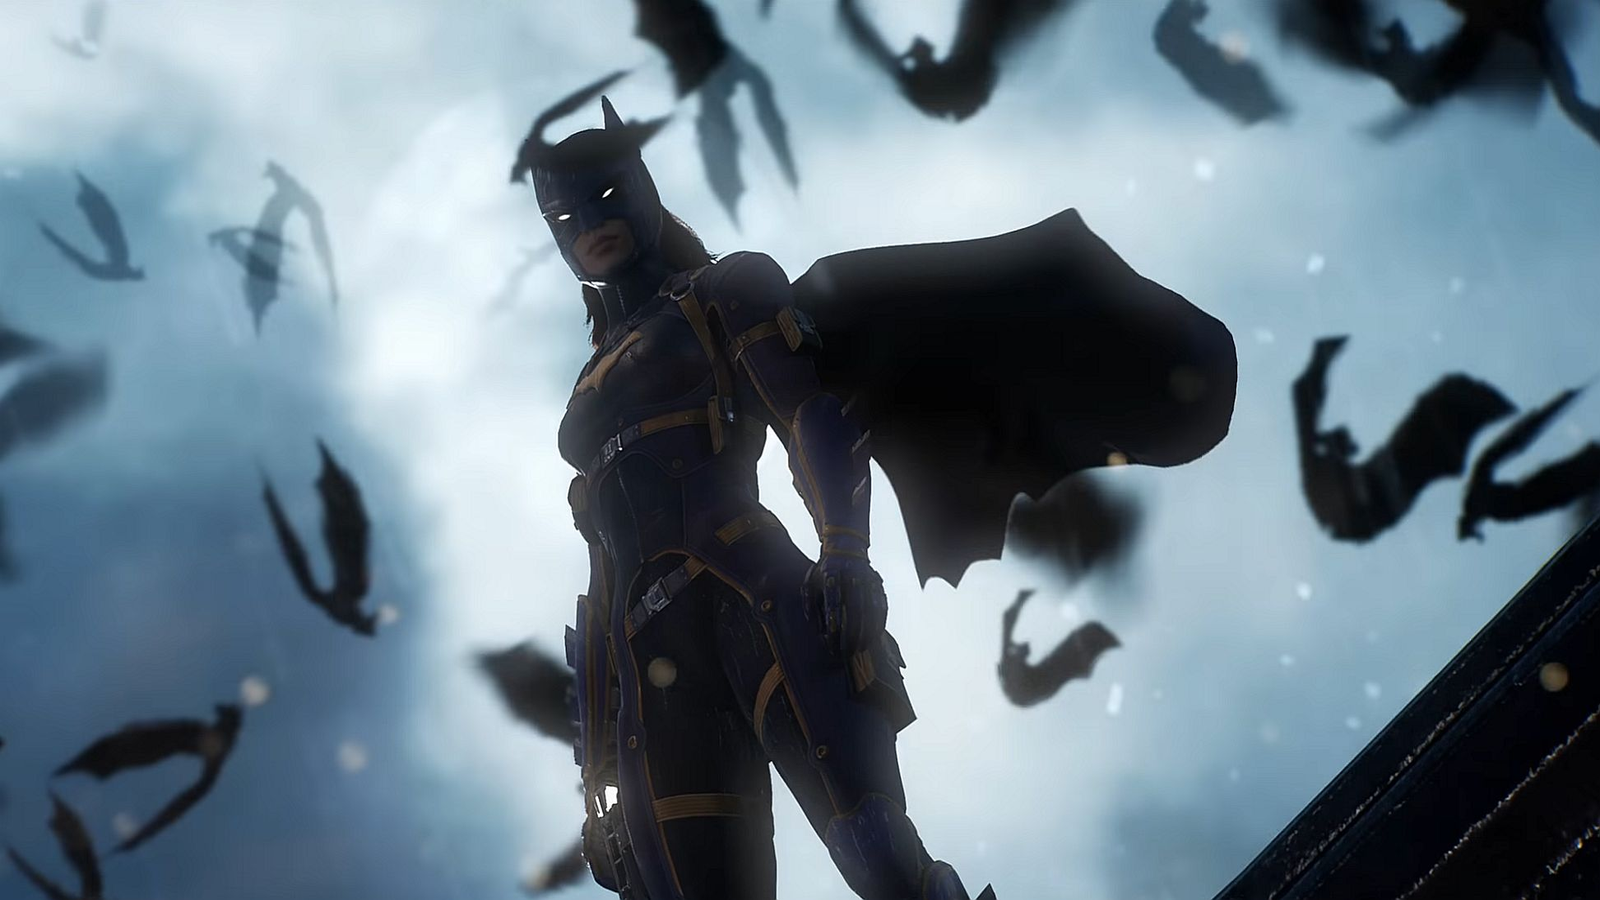 Gotham Knights is fixed - so we've re-reviewed every version of